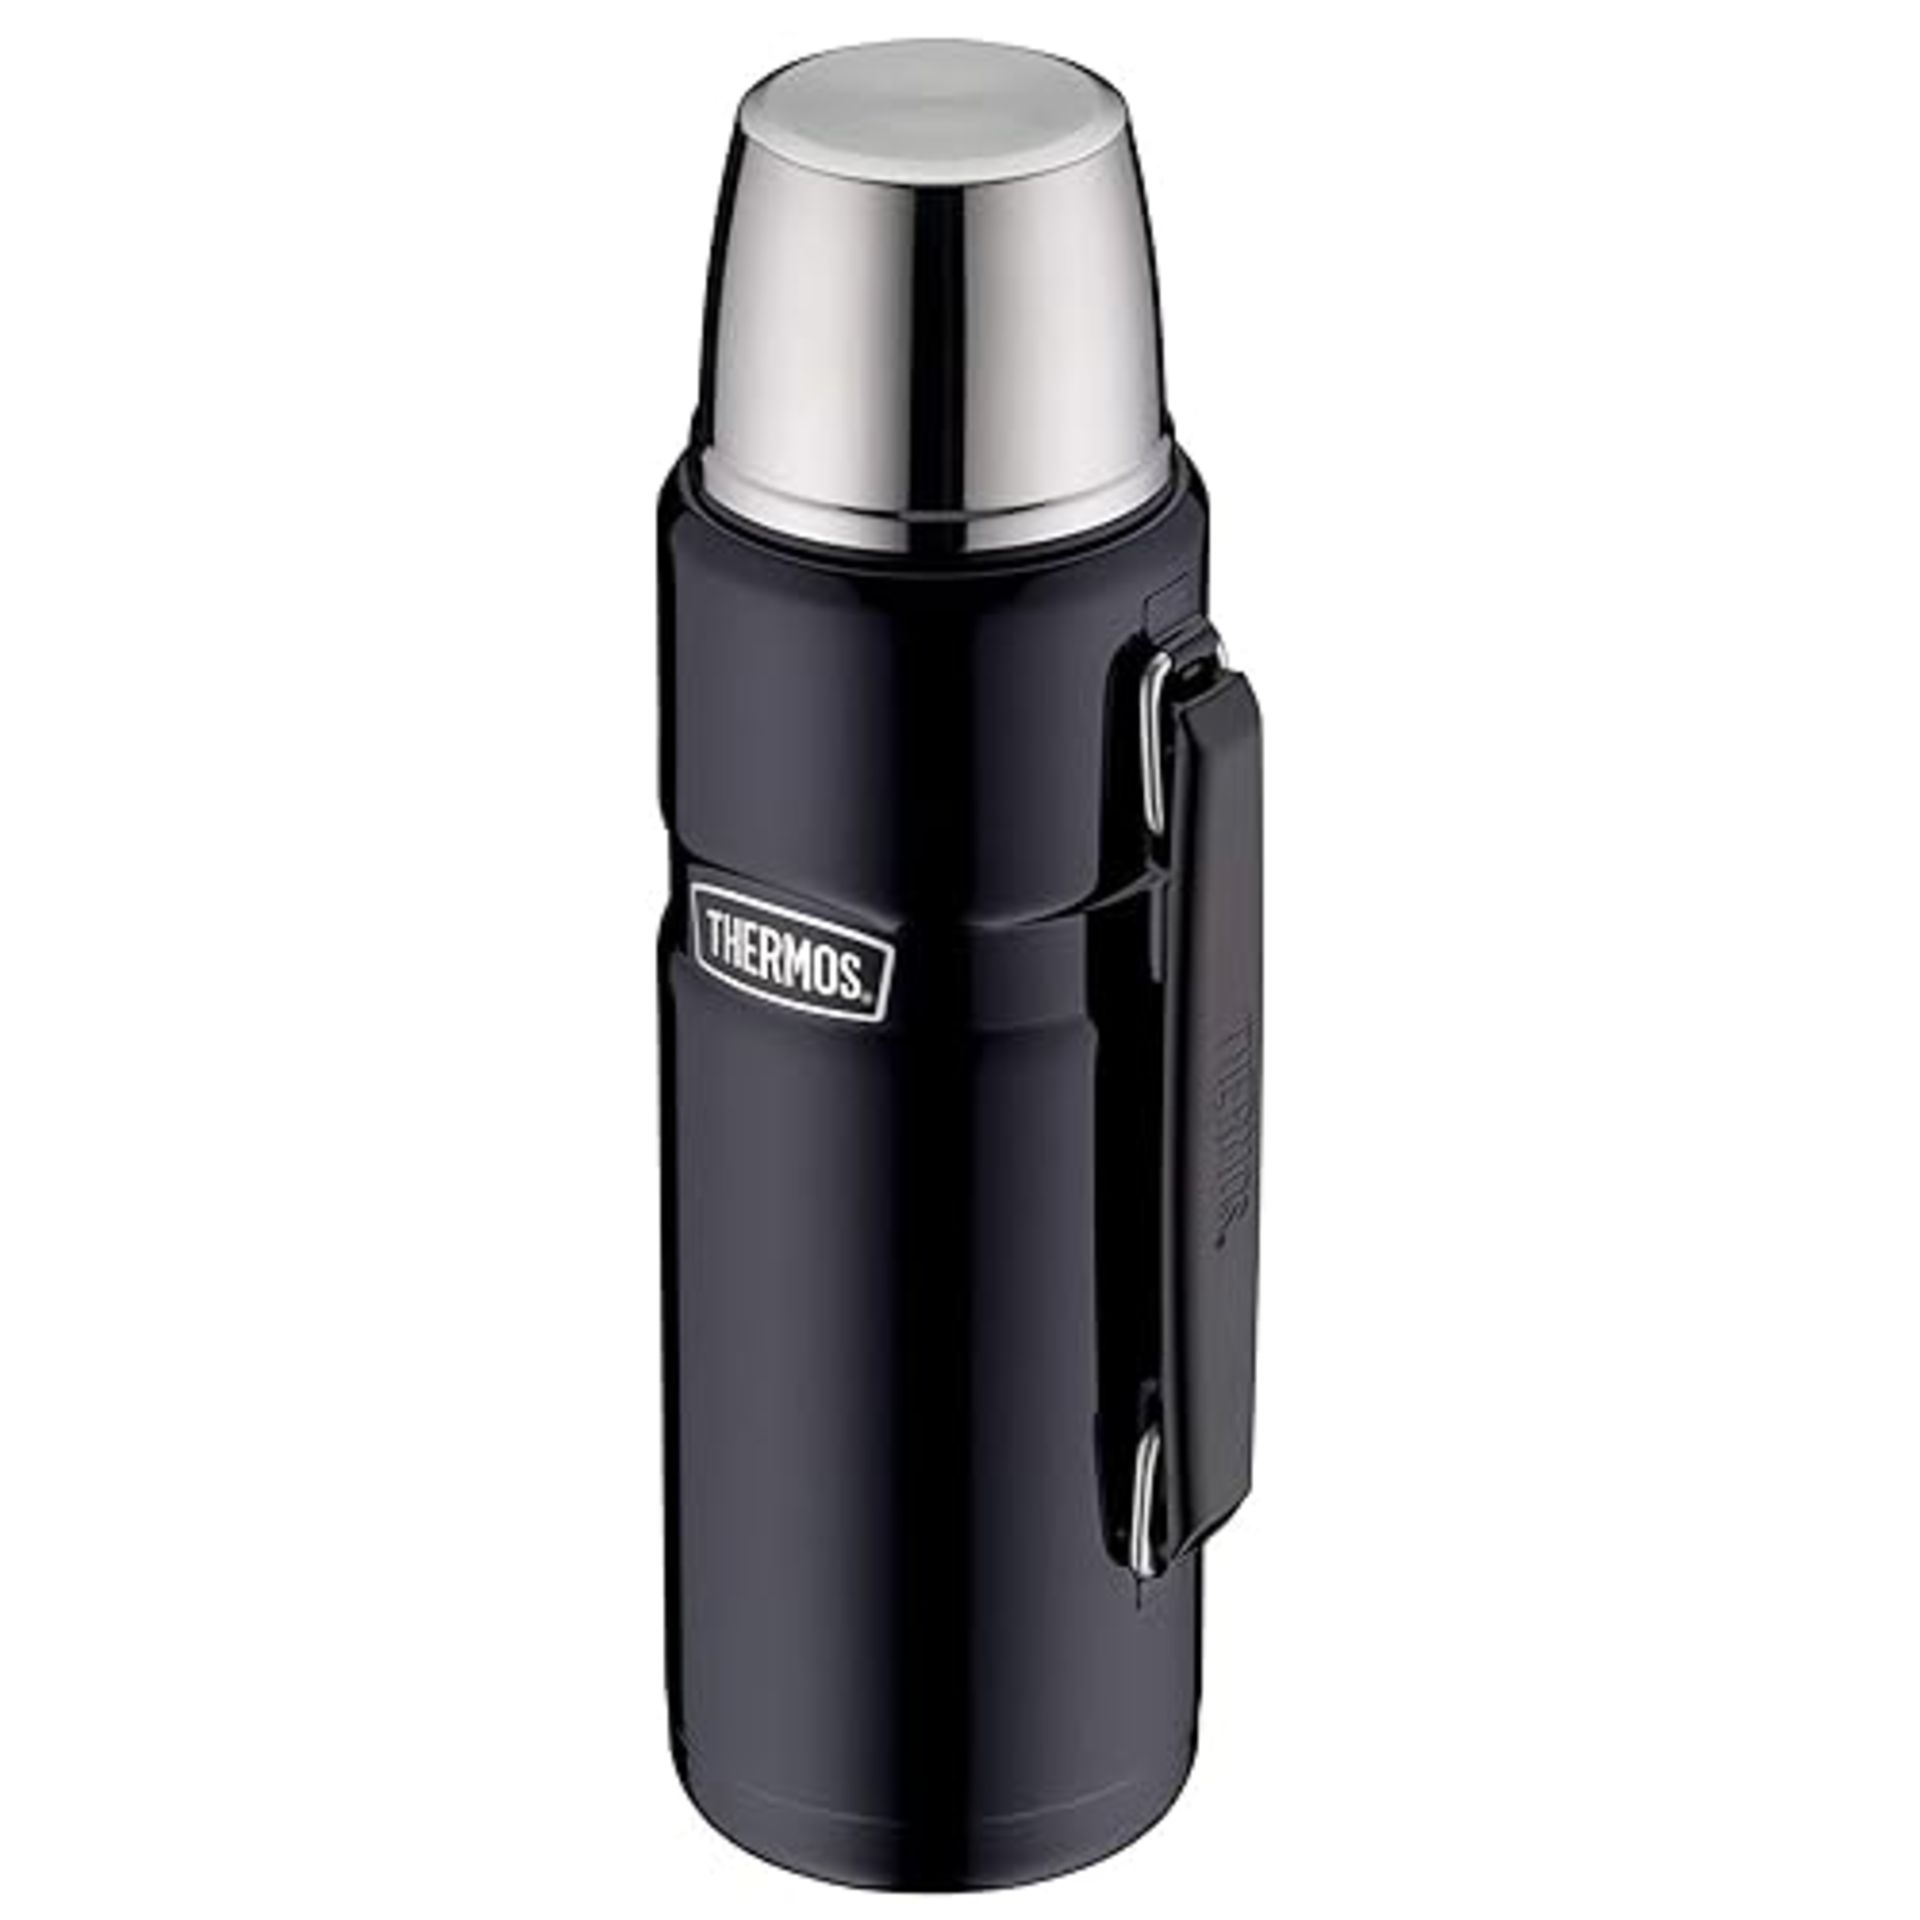 Thermos Stainless King Flask, Glossy Black, 1.2 L, 33.6 X 11.99 X 33.6 Cm, 183267